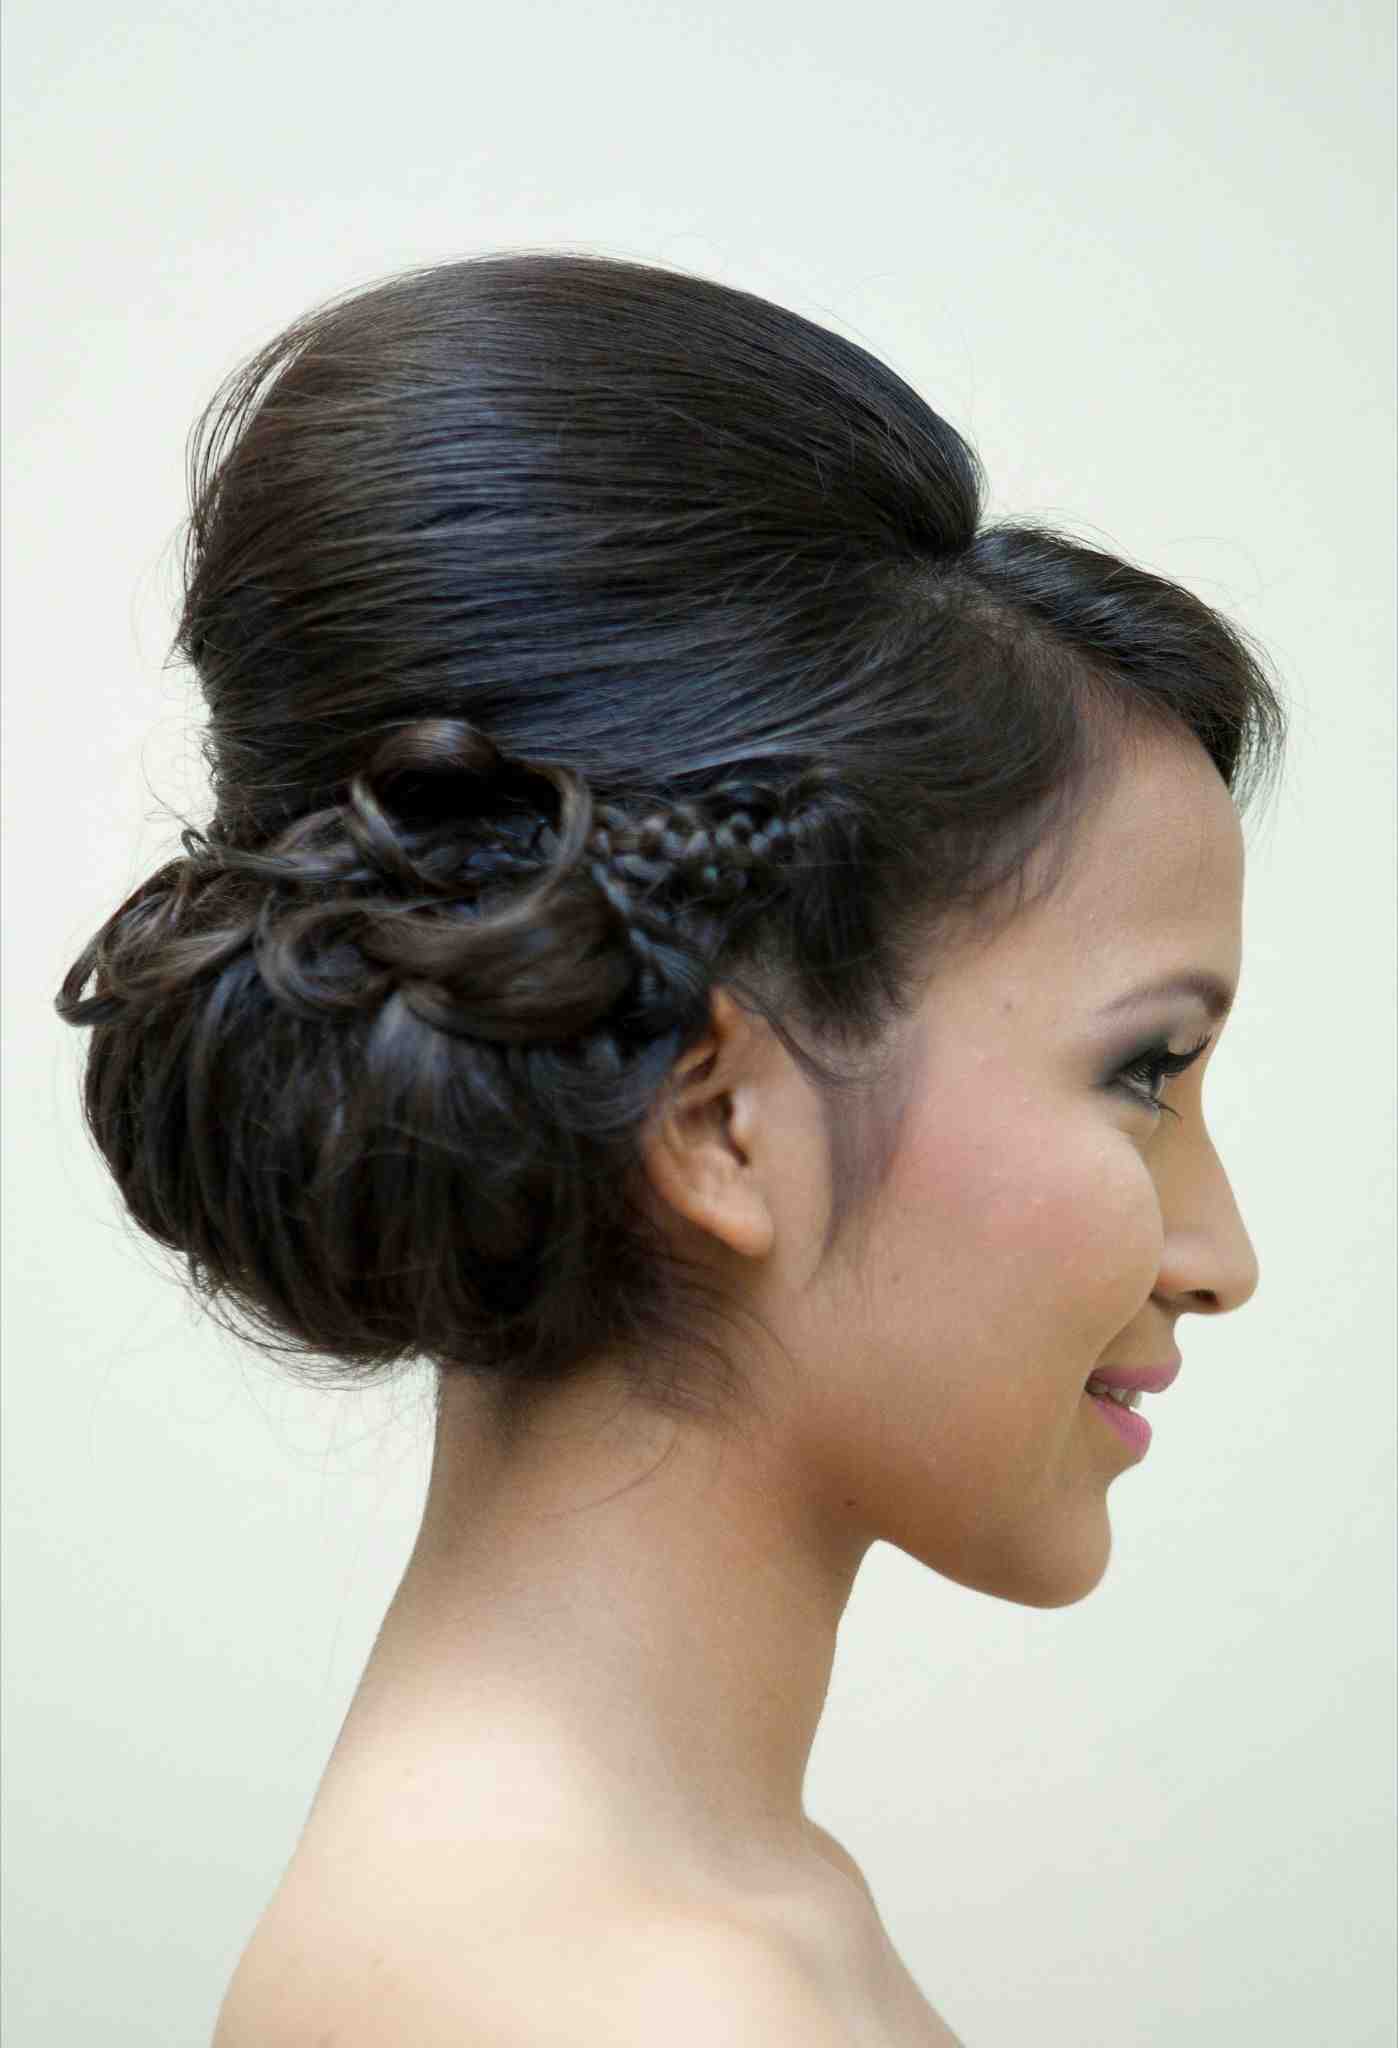 Beauty And Hair Salons In San Antonio Tx Beauty Salons For Quinceaneras My San Antonio Quinceanera